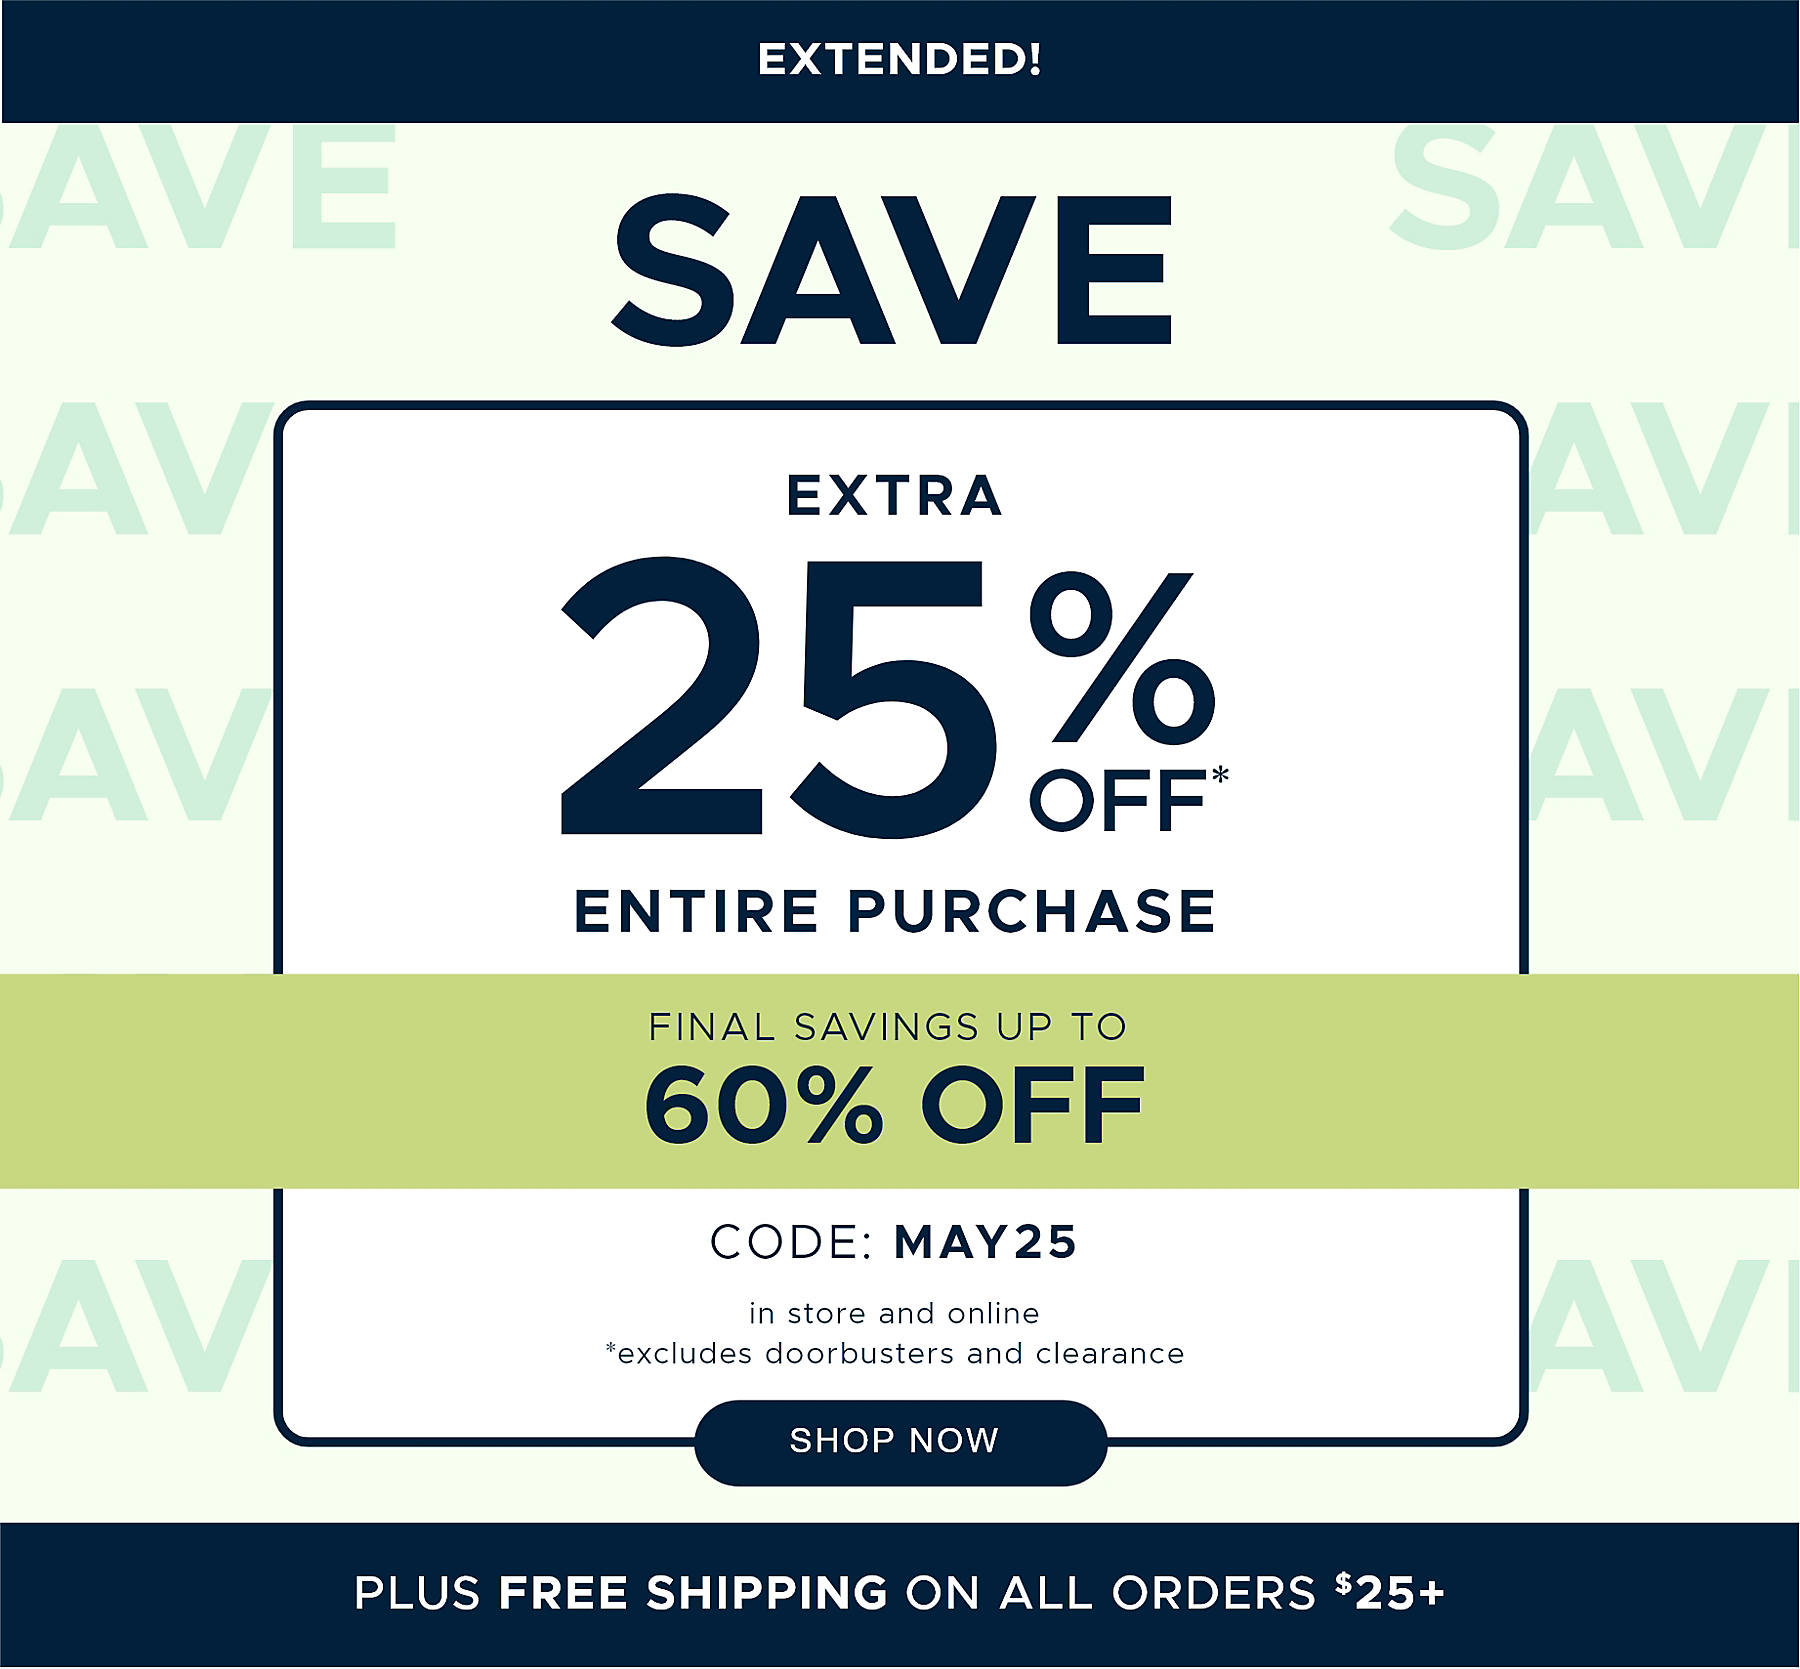 Extended! Save extra 25% off* Entire Purchase Final Savings Up to 60% off code: MAY25 in store and online *excludes doorbusters and clearance Plus Free Shipping on All Orders $25+